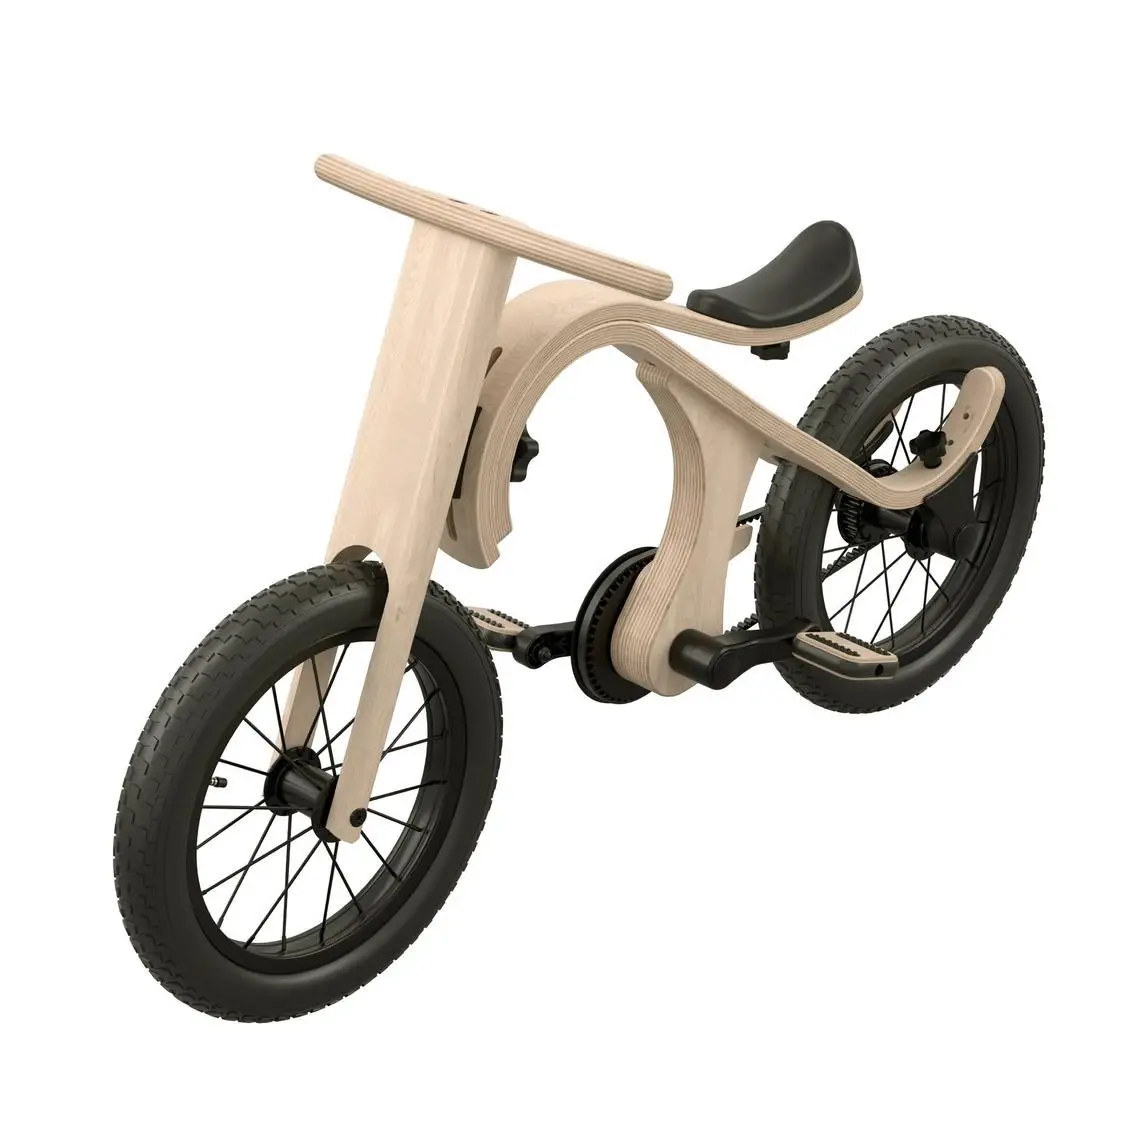 kids wooden balance training bike 3 in 1 mini toy baby toddler push bike with pedals